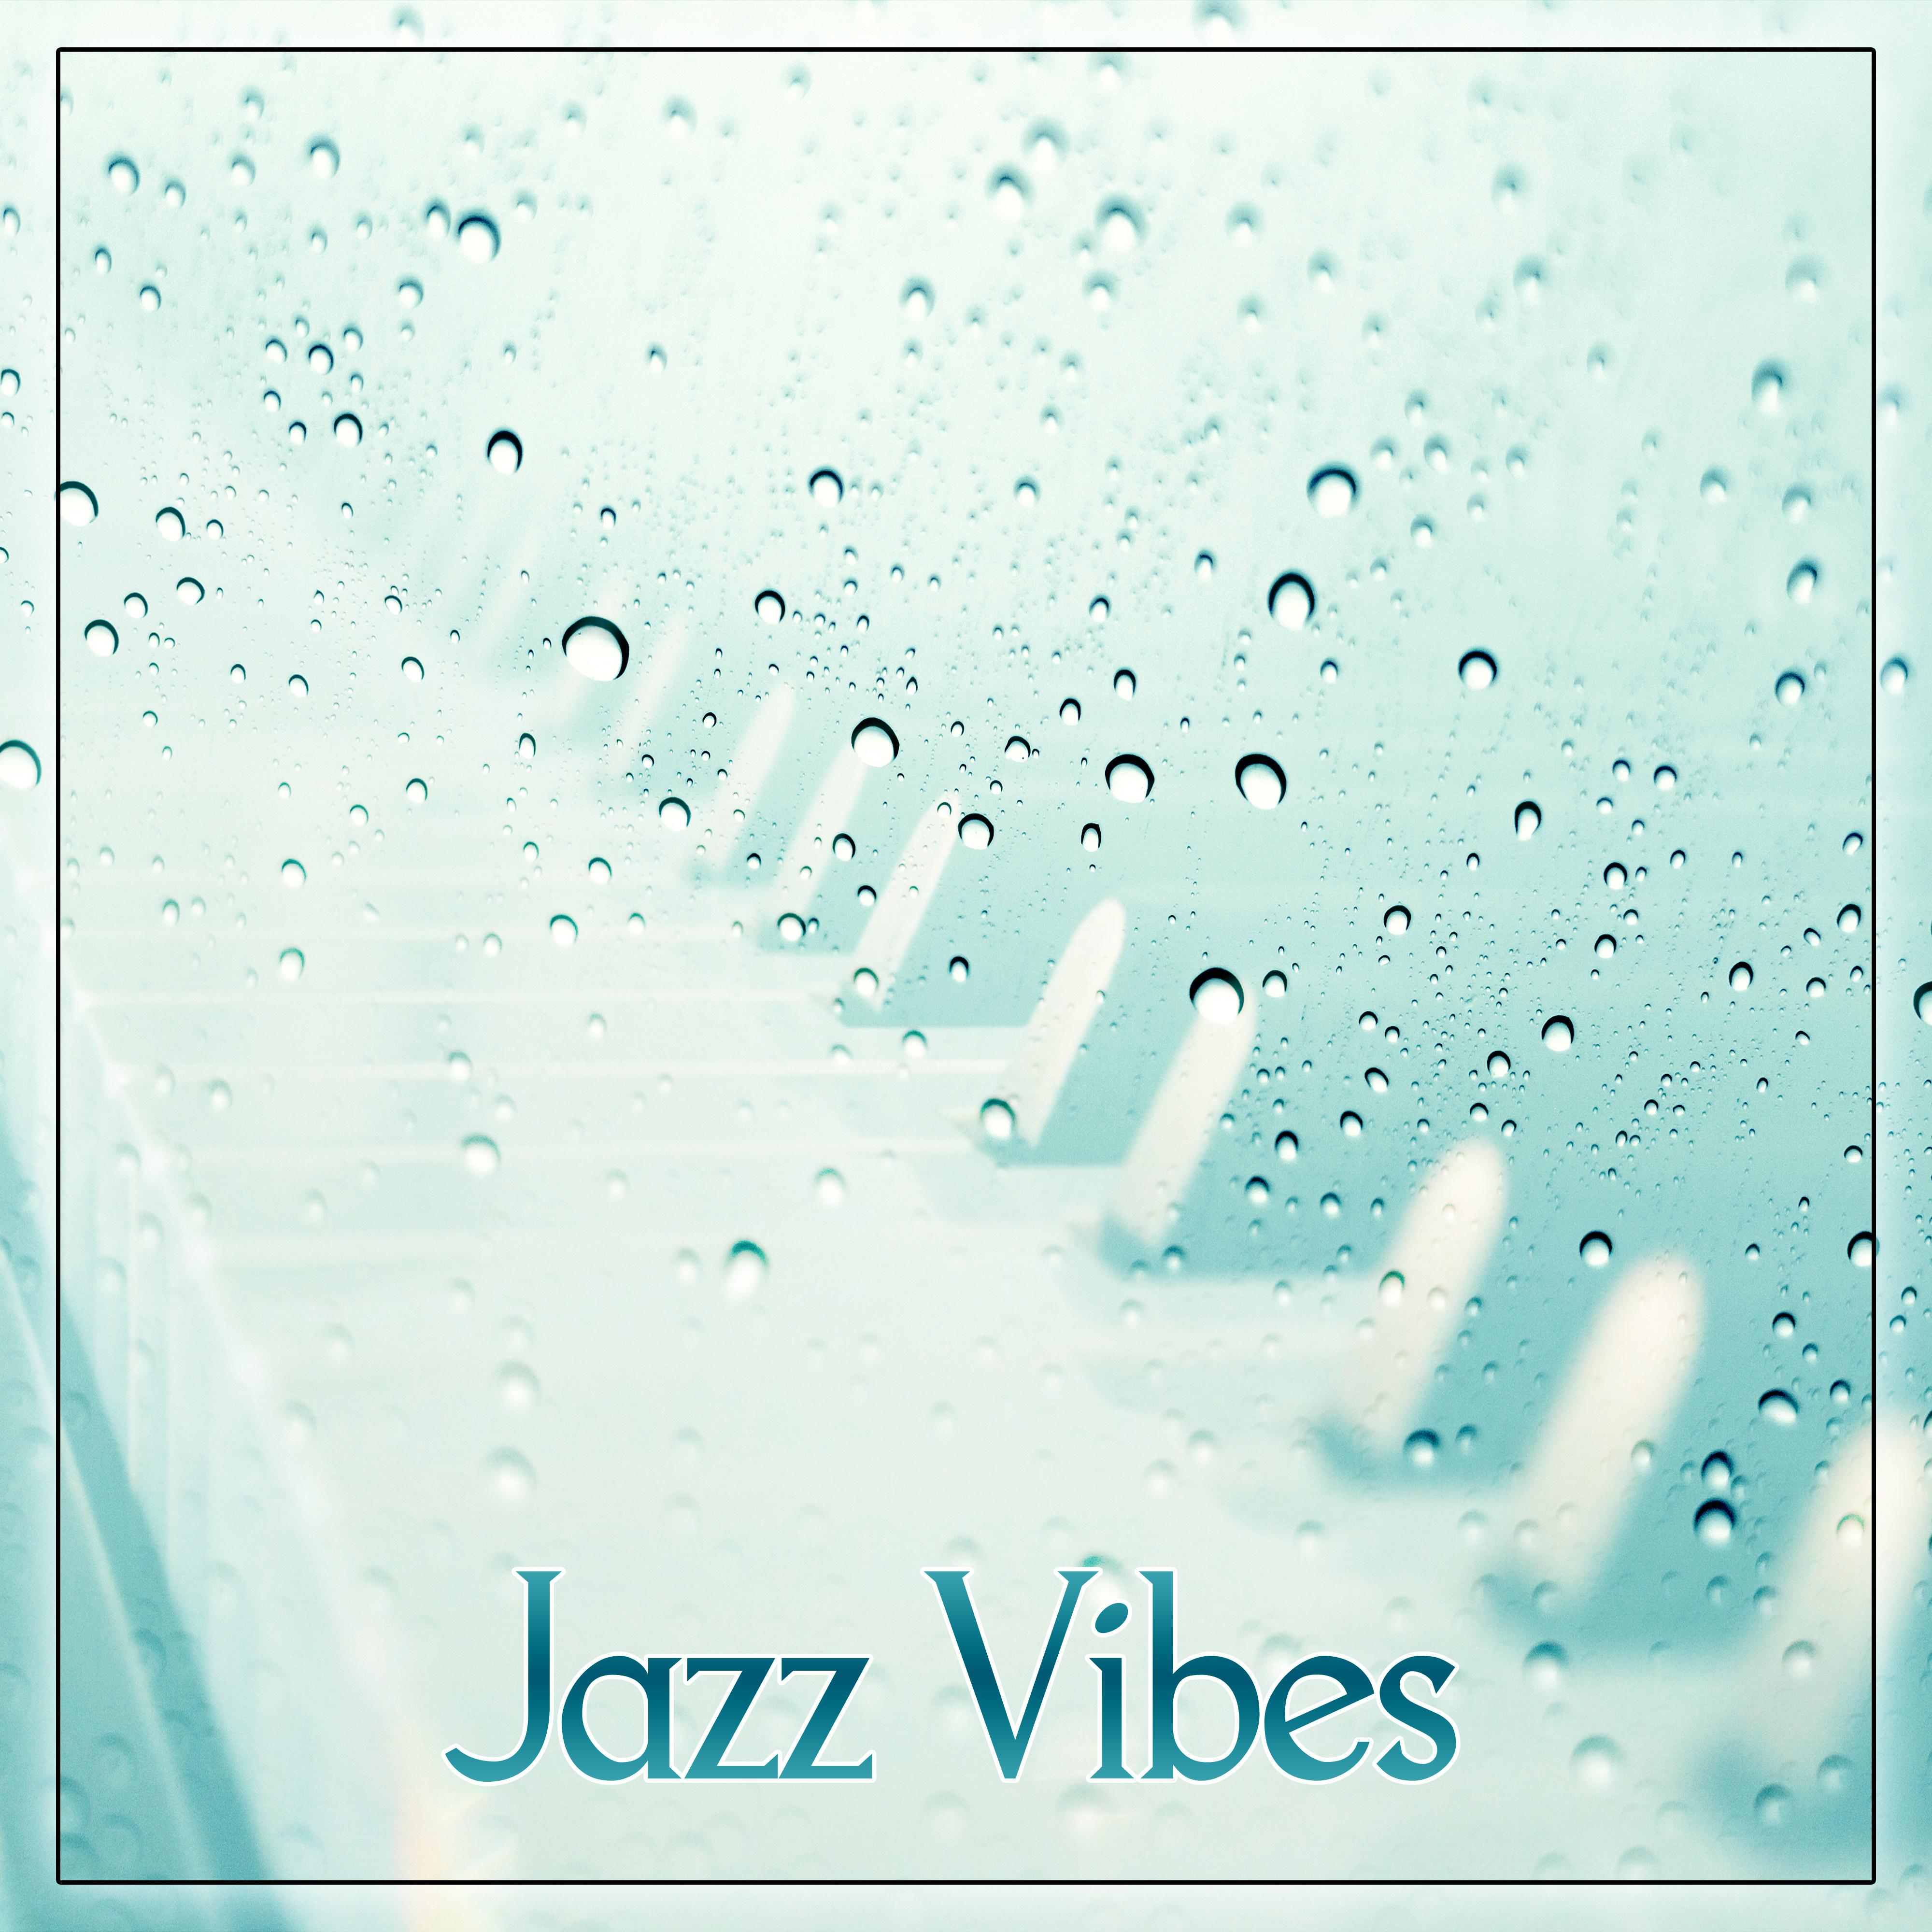 Jazz Vibes – Smooth Jazz for Relax Session, Free Friday, Soothing Vibes of Jazz Piano Sounds, Background Music to Relax